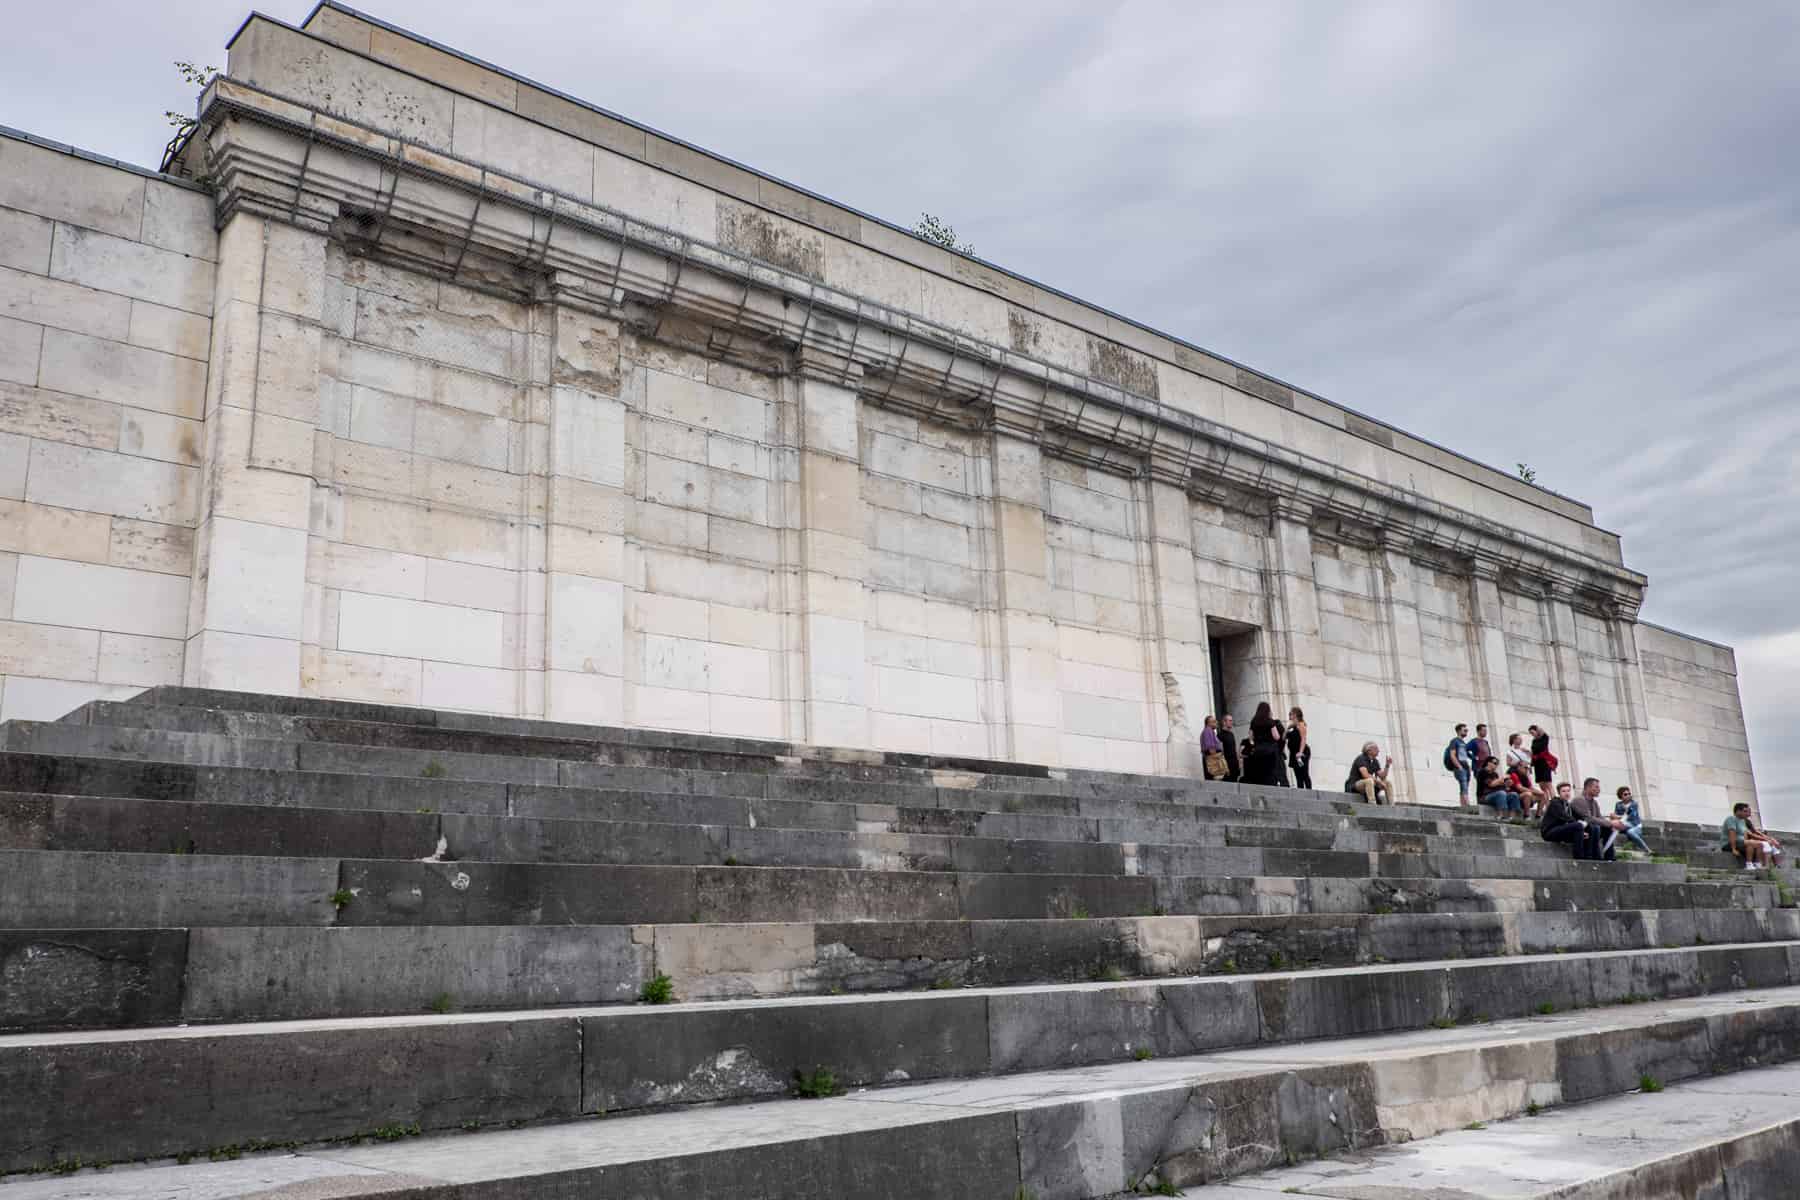 Main white stone clad building and staging steps of the Zeppelin Field Nazi Rally Grounds site in Nuremberg